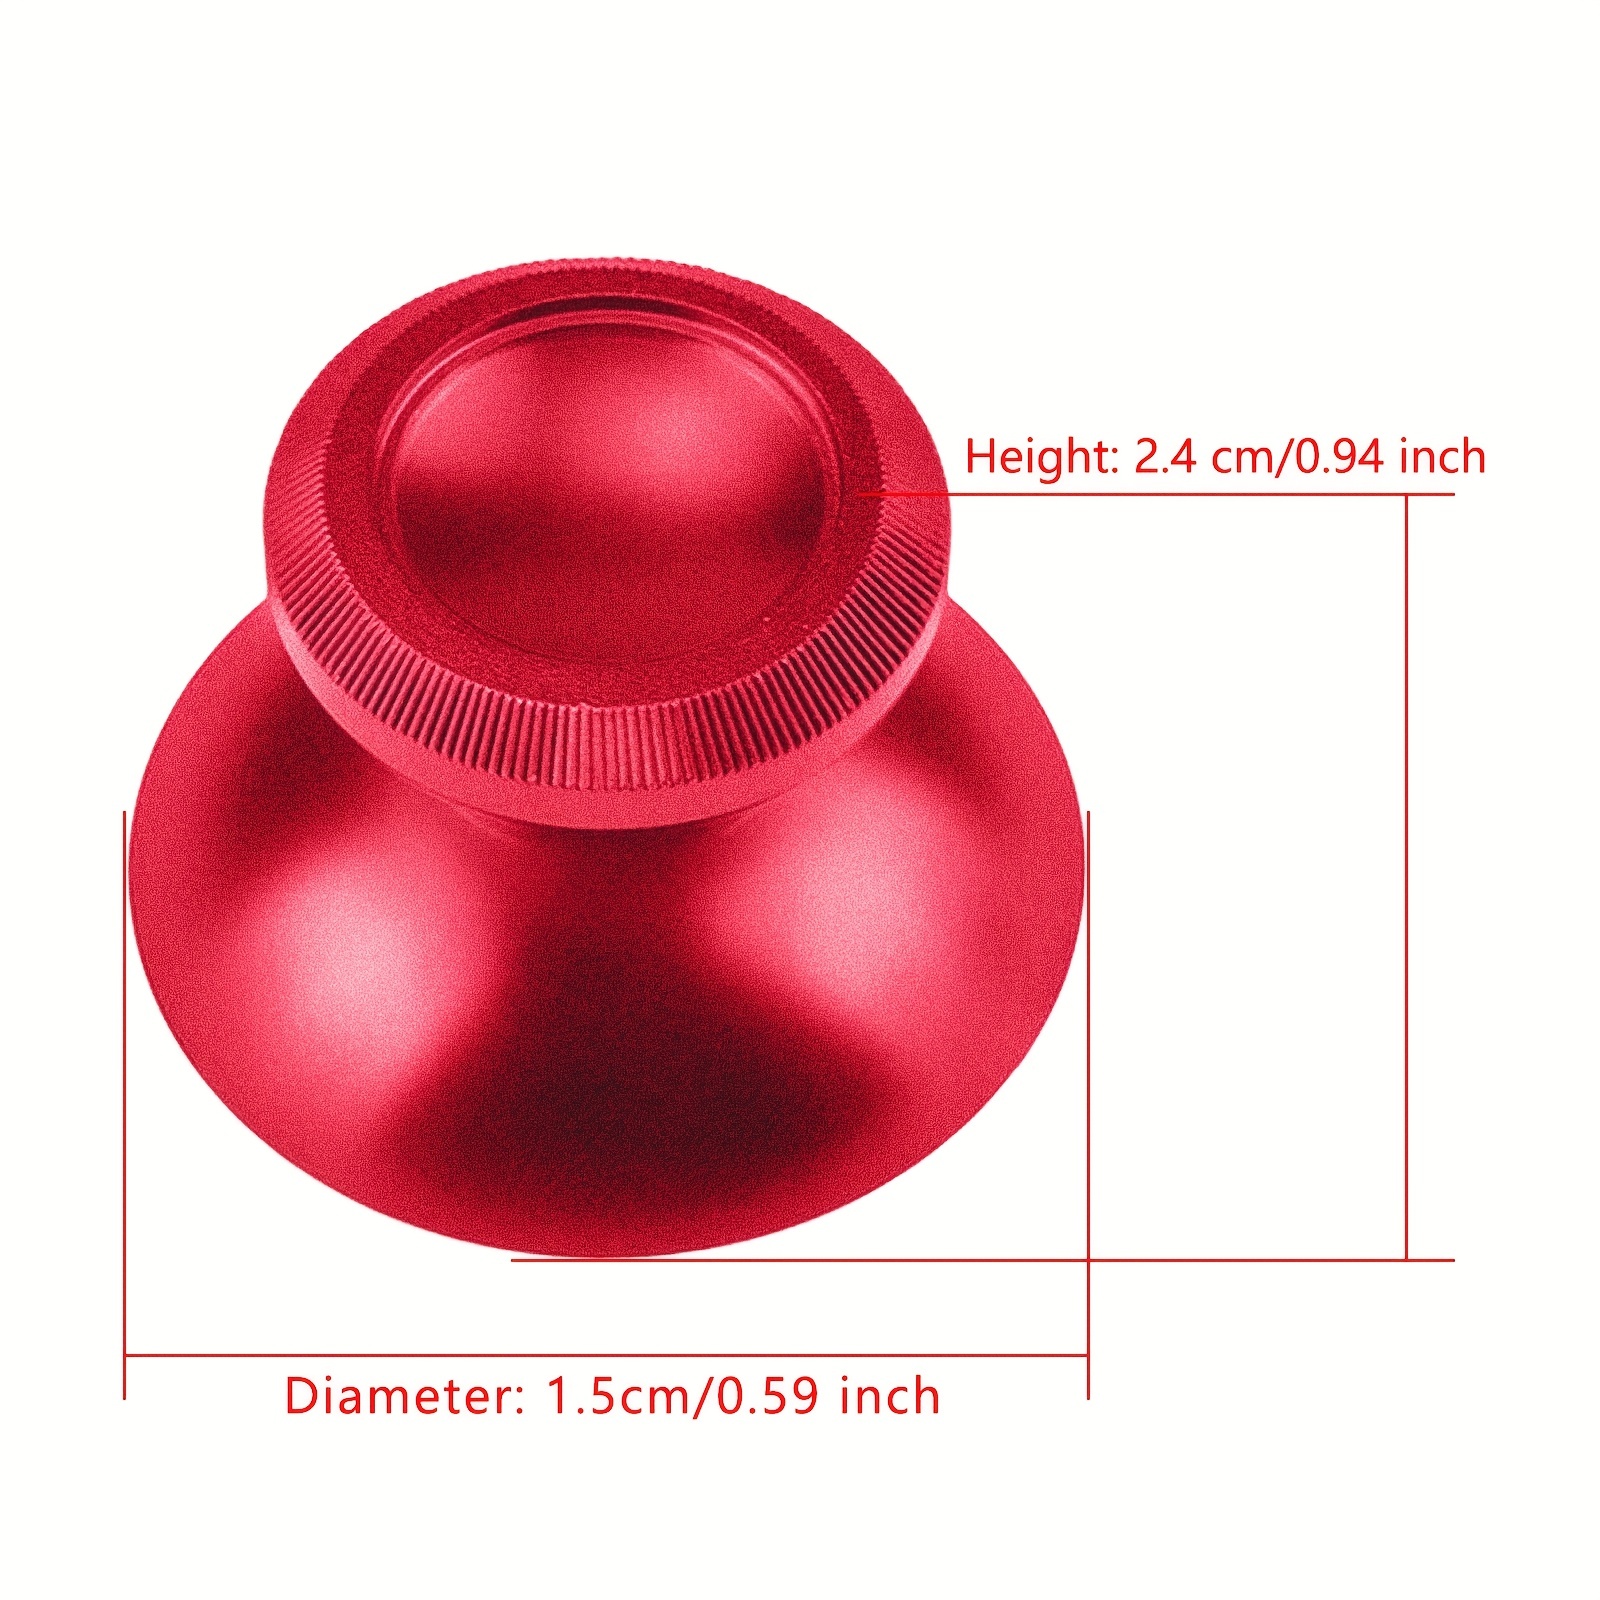  2PCS 3D Analog Joystick Cap Thumb Stick Cap Thumbstick  Replacement for Xbox One Slim Xbox One Xbox One Elite Controller (Red) :  Video Games